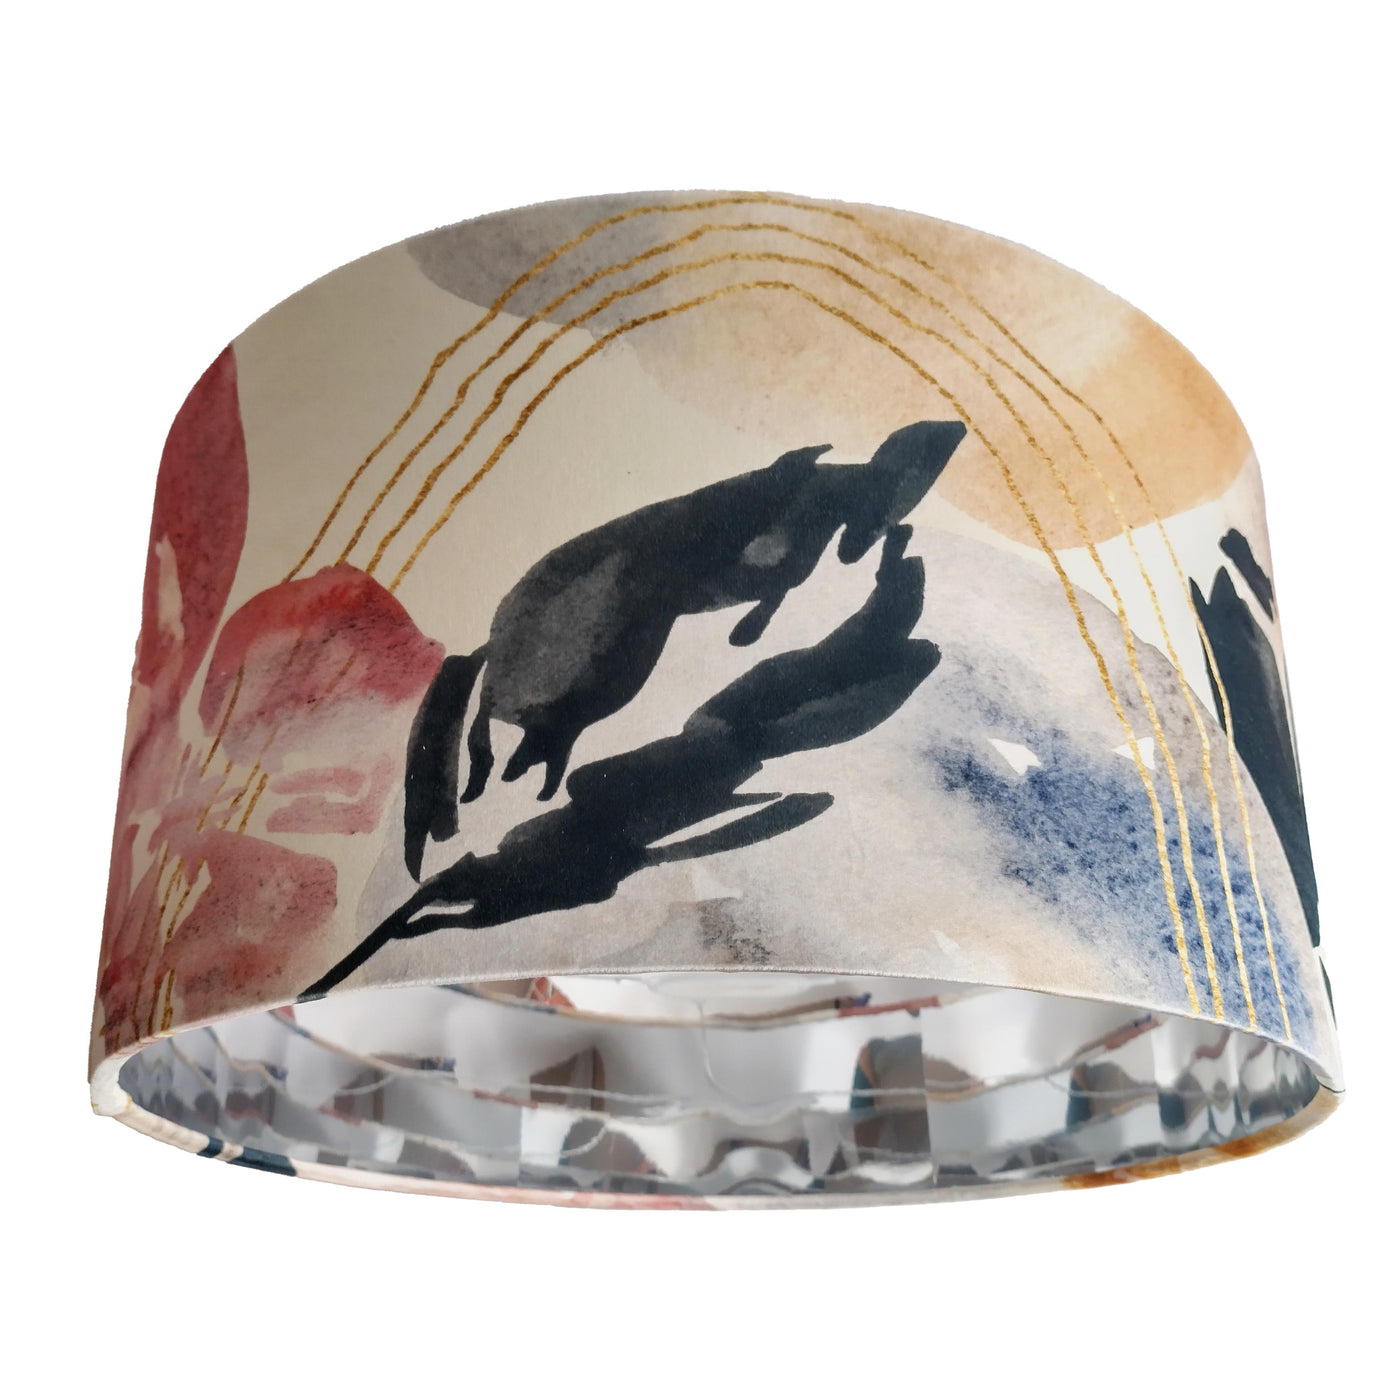 Abstract Velvet Lampshade in Cream with Mirror Silver Lining